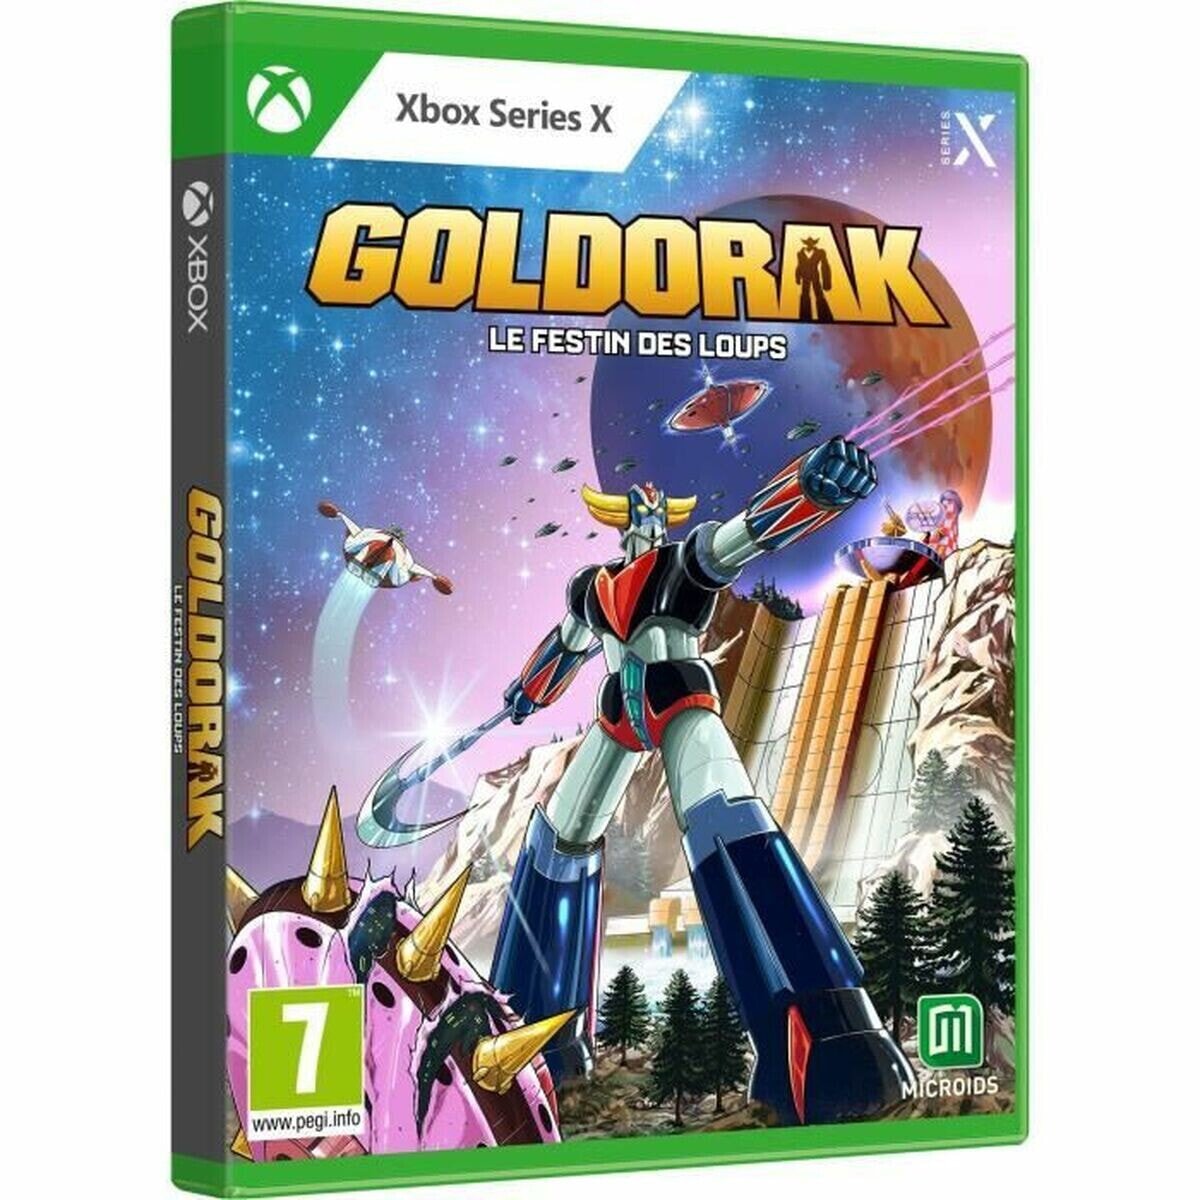 Видеоигры Xbox Series X Microids Goldorak Grendizer: The Feast of the Wolves - Standard Edition (FR)